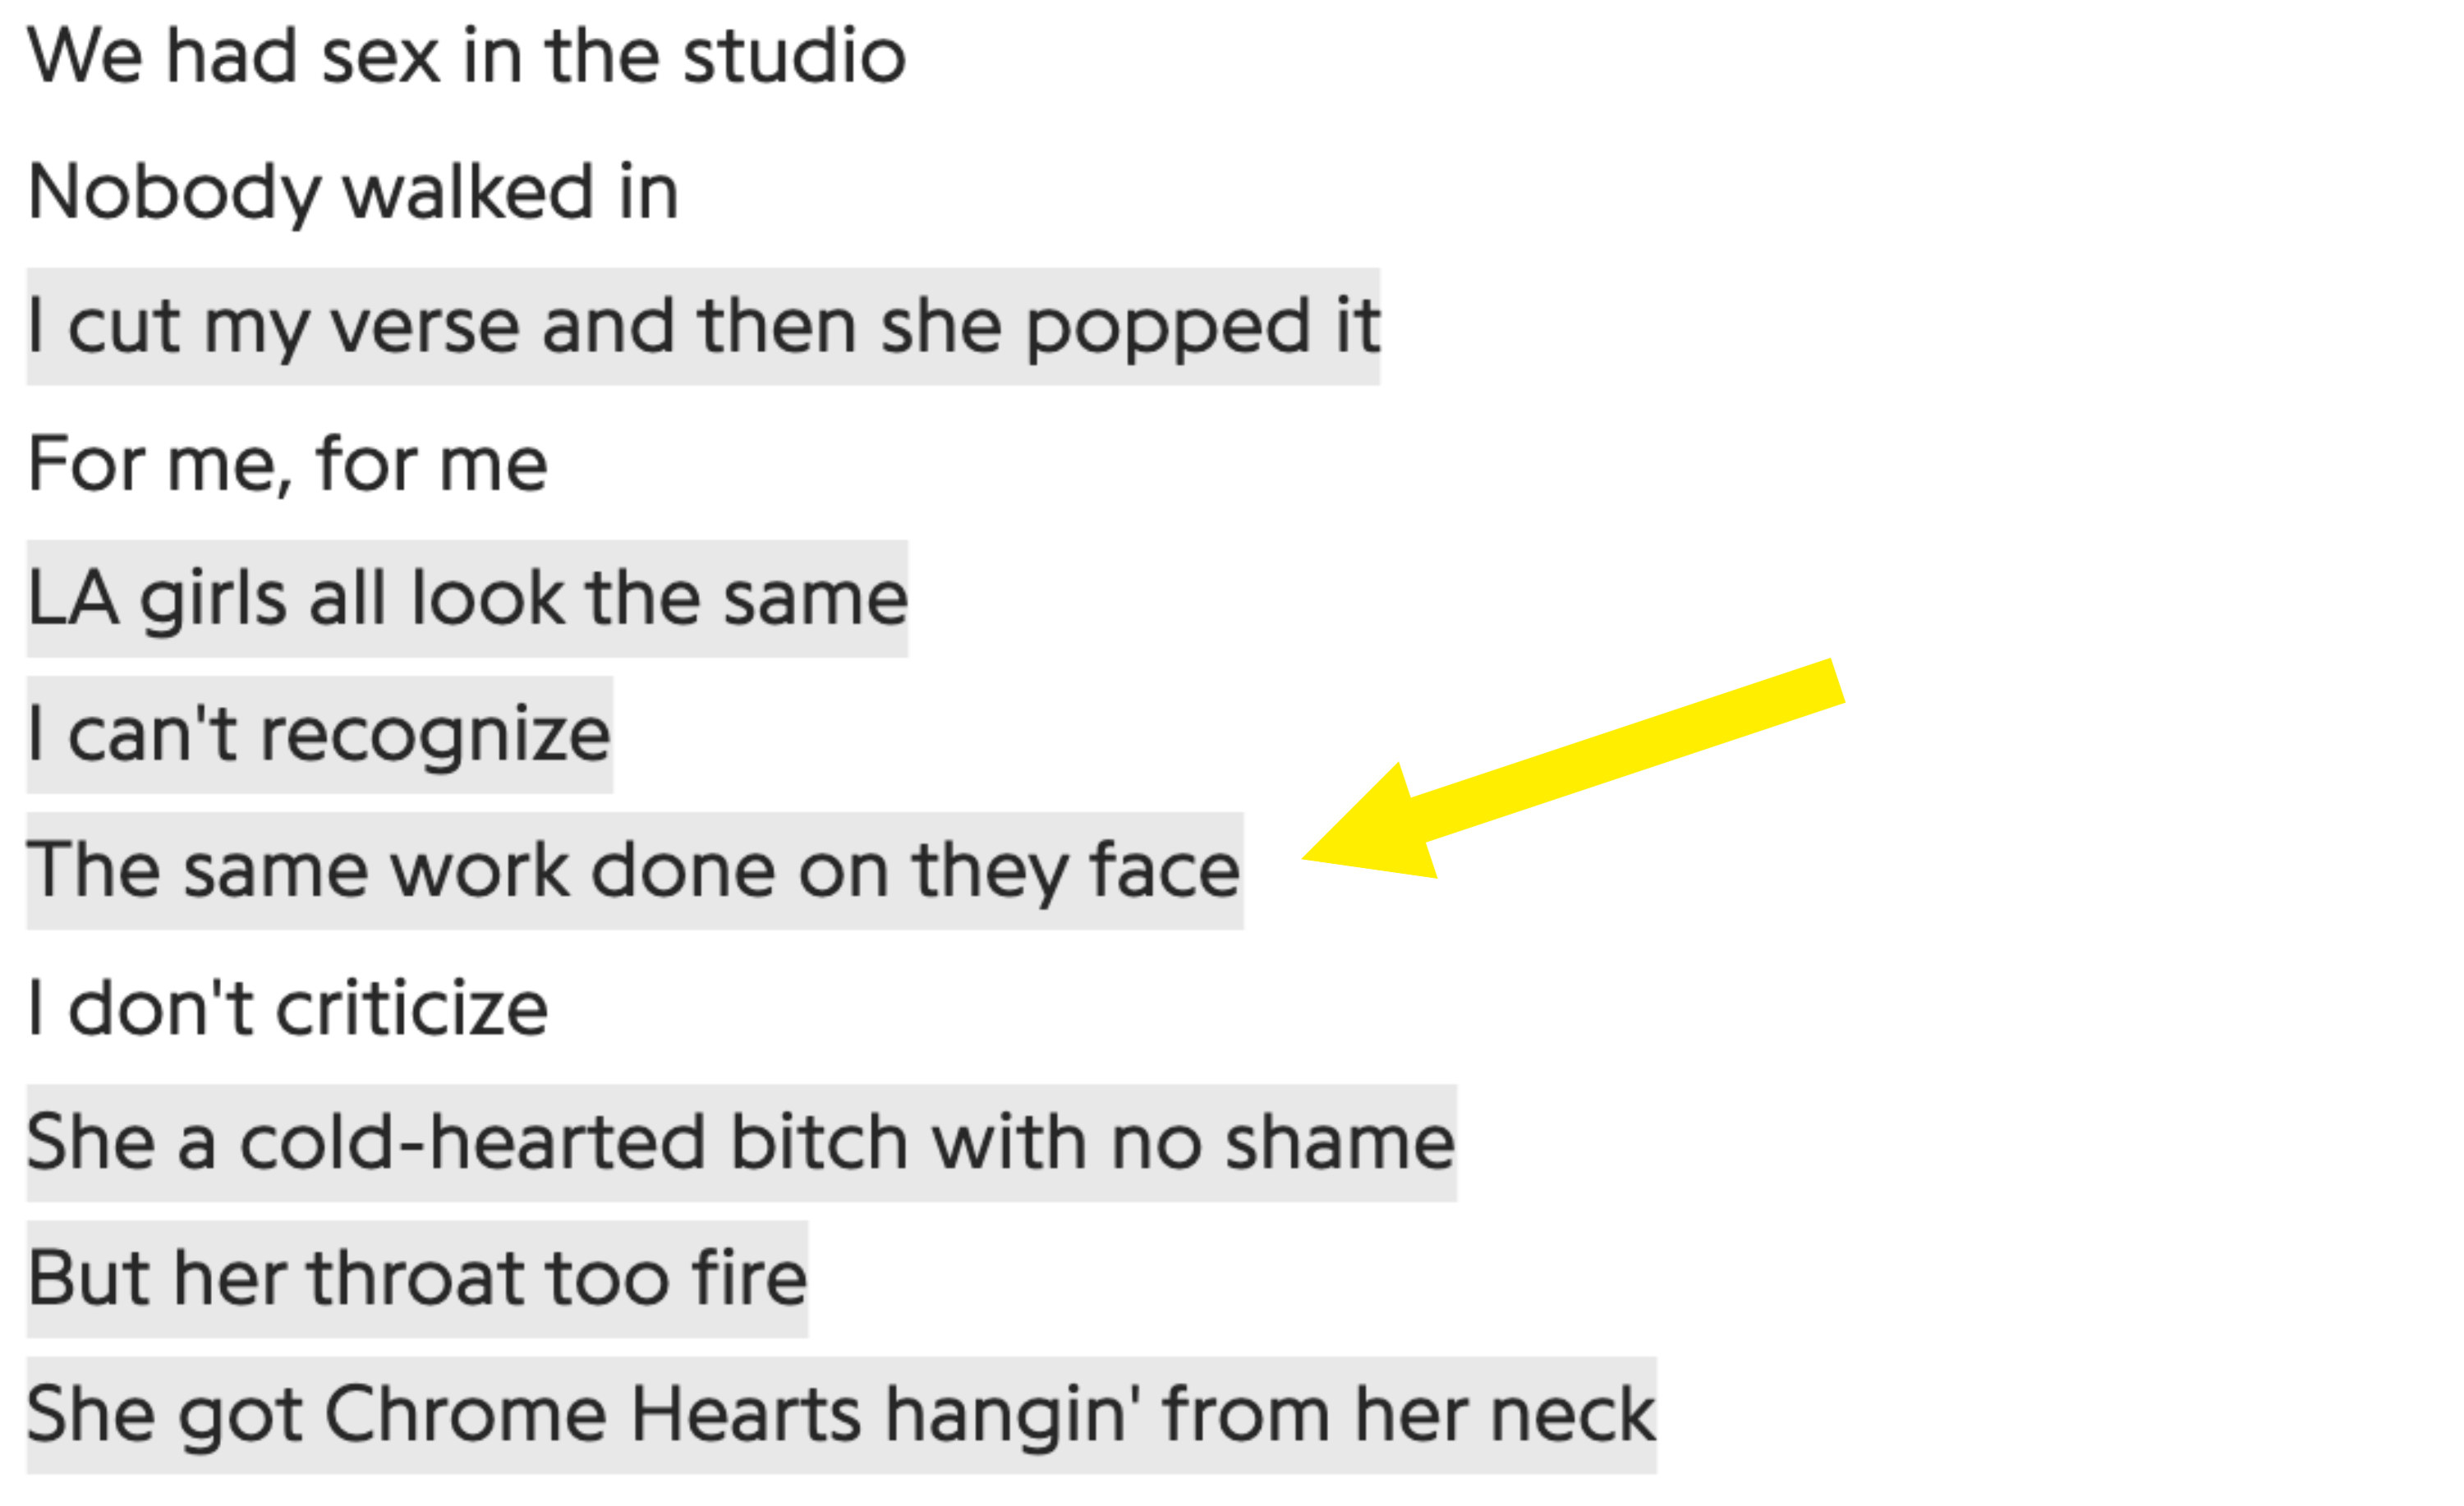 Lyrics which read, &quot;LA girls all look the same / I can't recognize / The same work done on they face&quot; and then a reference to &quot;Chrome Hearts hangin' from her neck&quot;